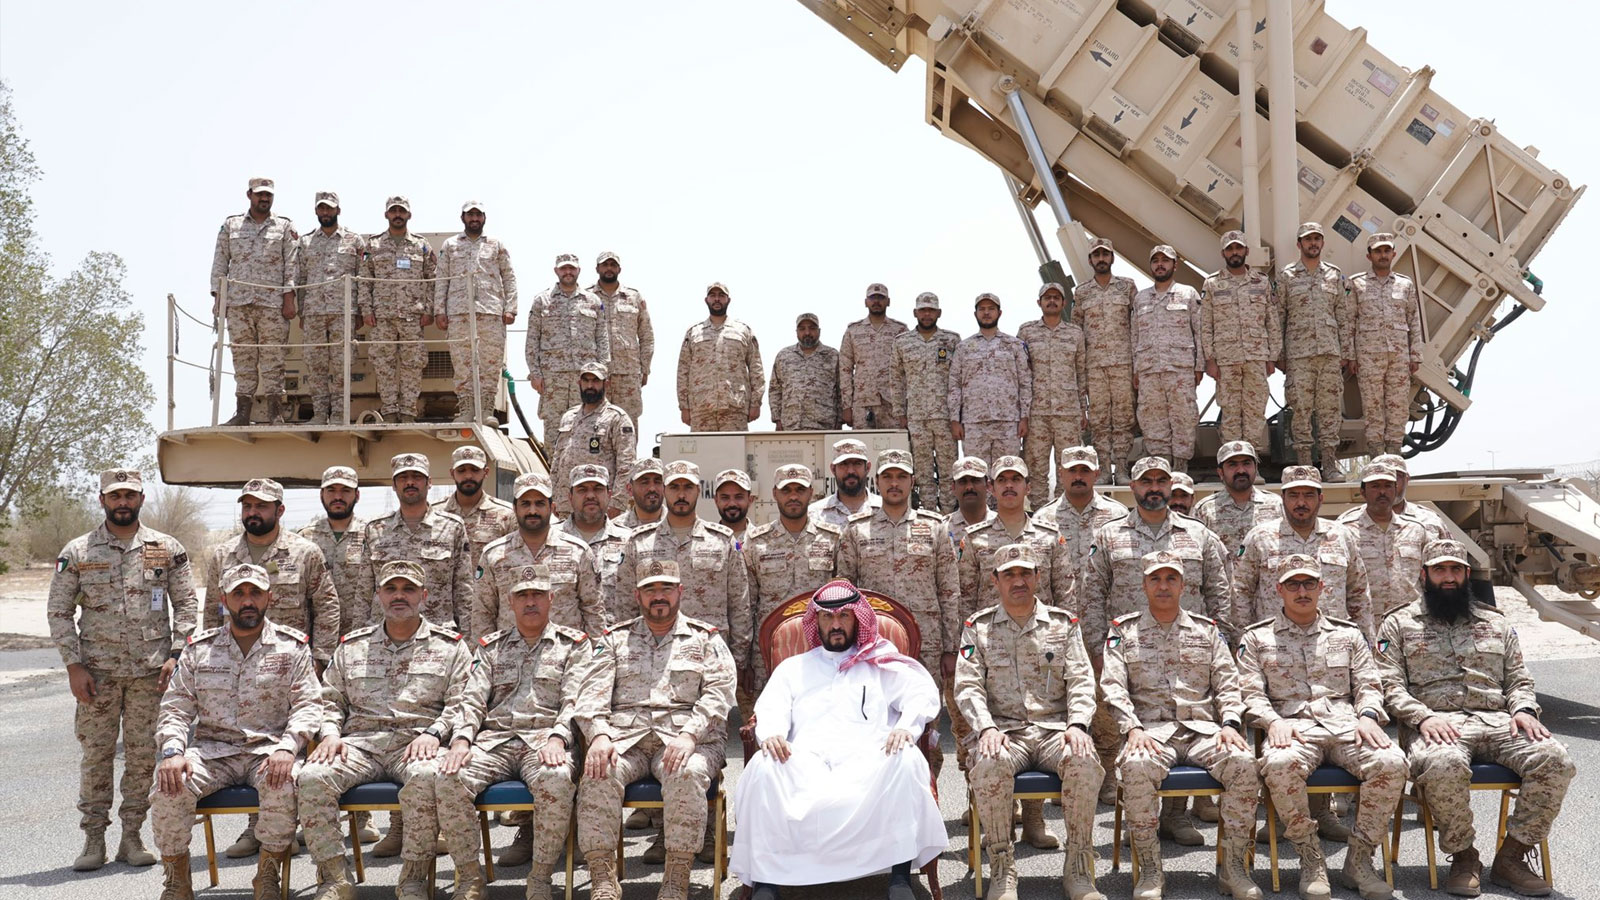 Defense Minister during a visit to Kuwait Air Defense Force base